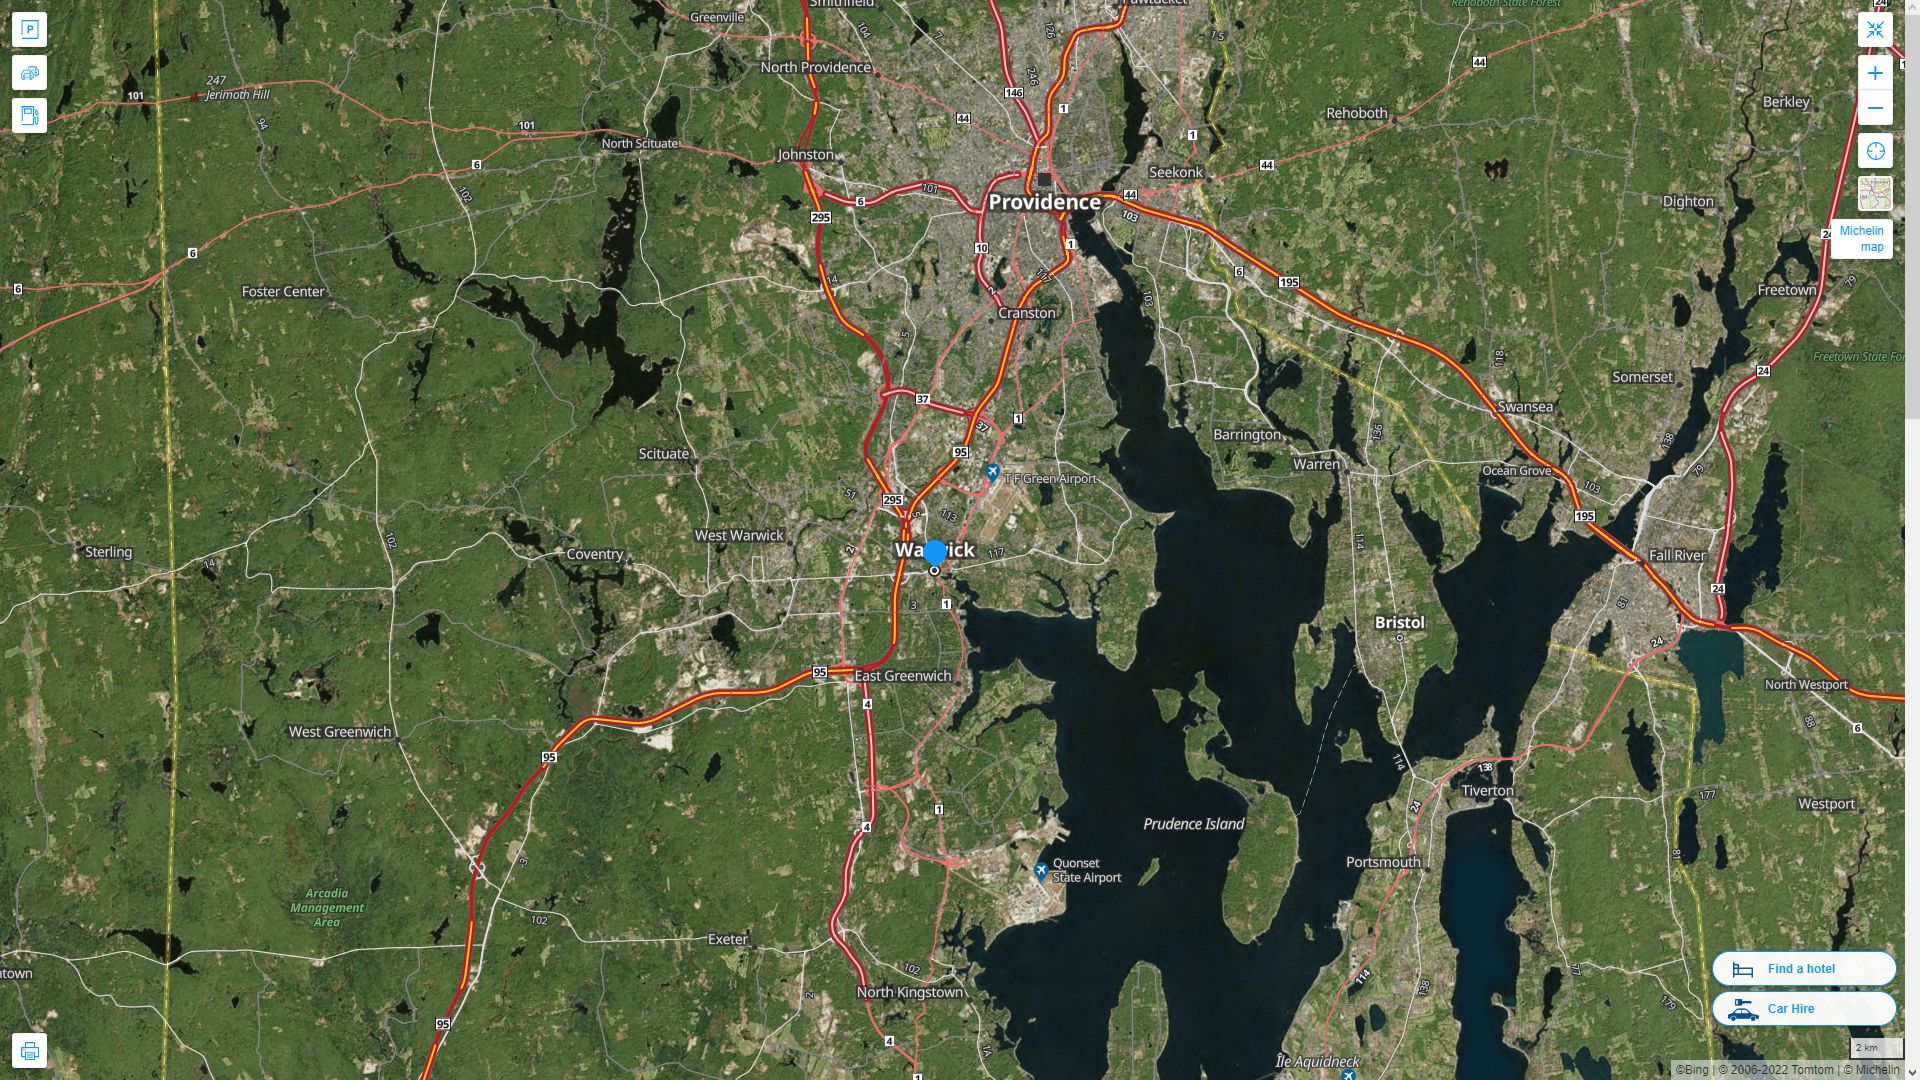 Warwick Rhode Island Highway and Road Map with Satellite View